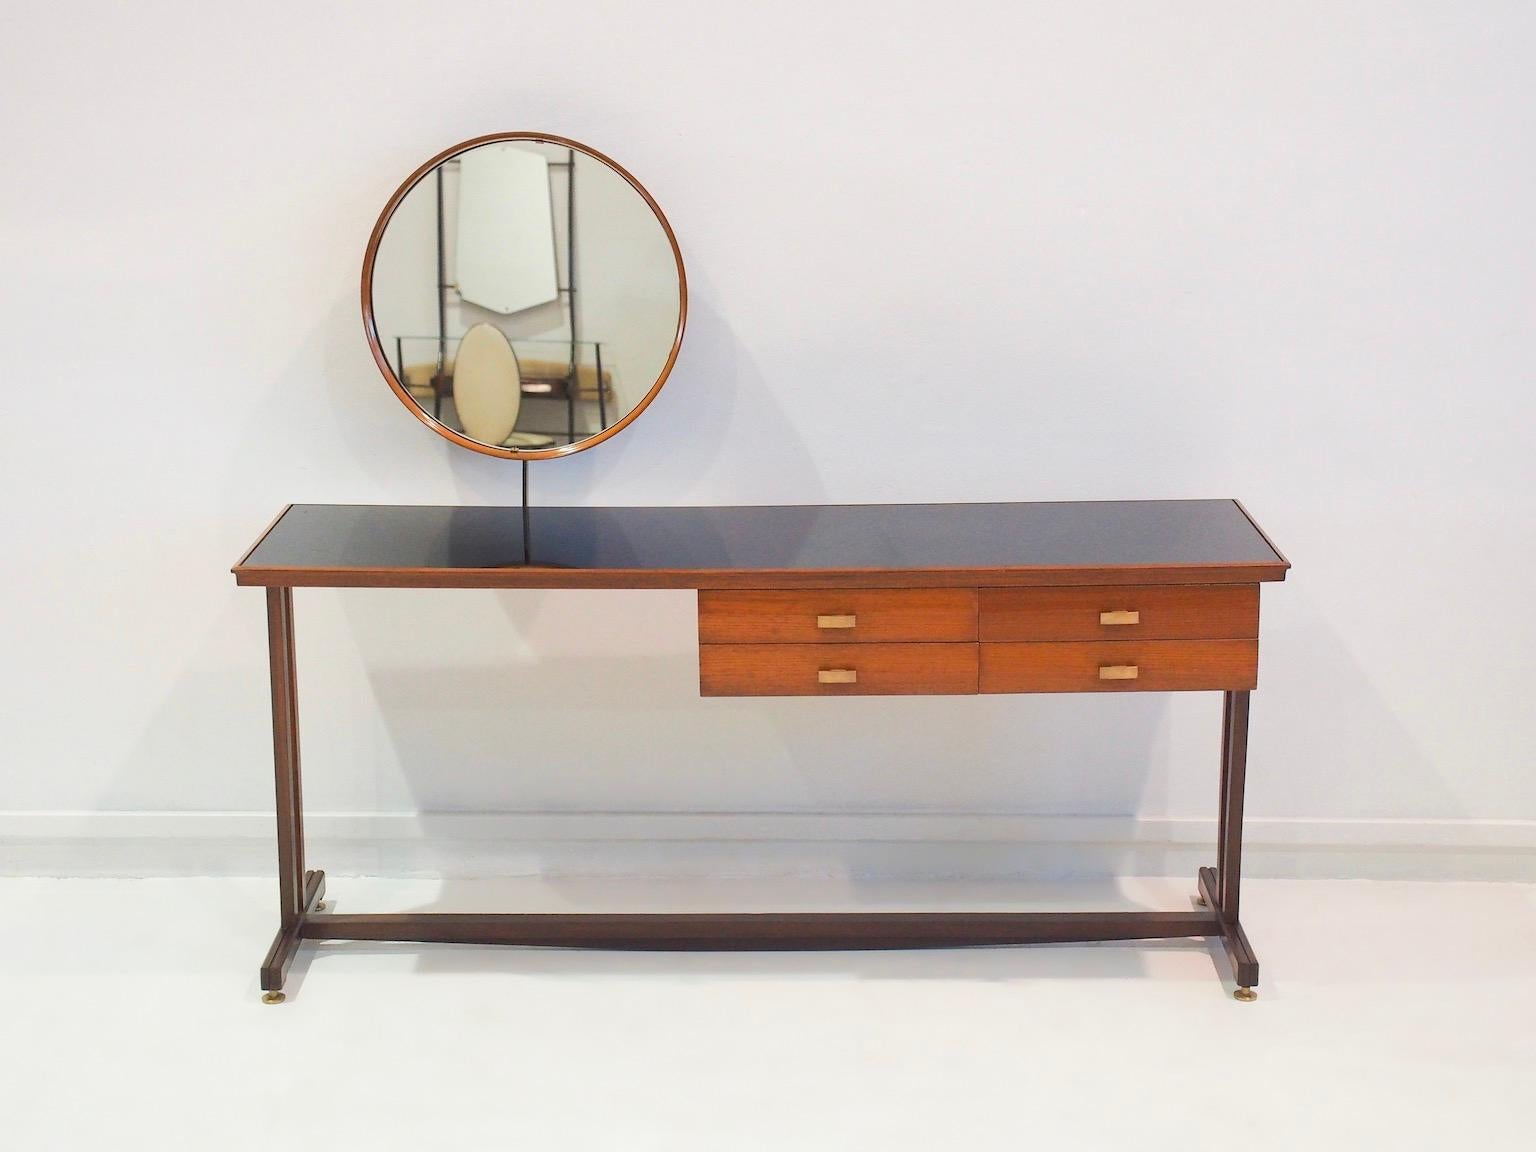 Wooden dressing table with round mirror made in Italy in the 1950s. The vanity has four drawers with brass handles, dark smoked glass table top and brass feet. Slight age-related wear, recently restored.